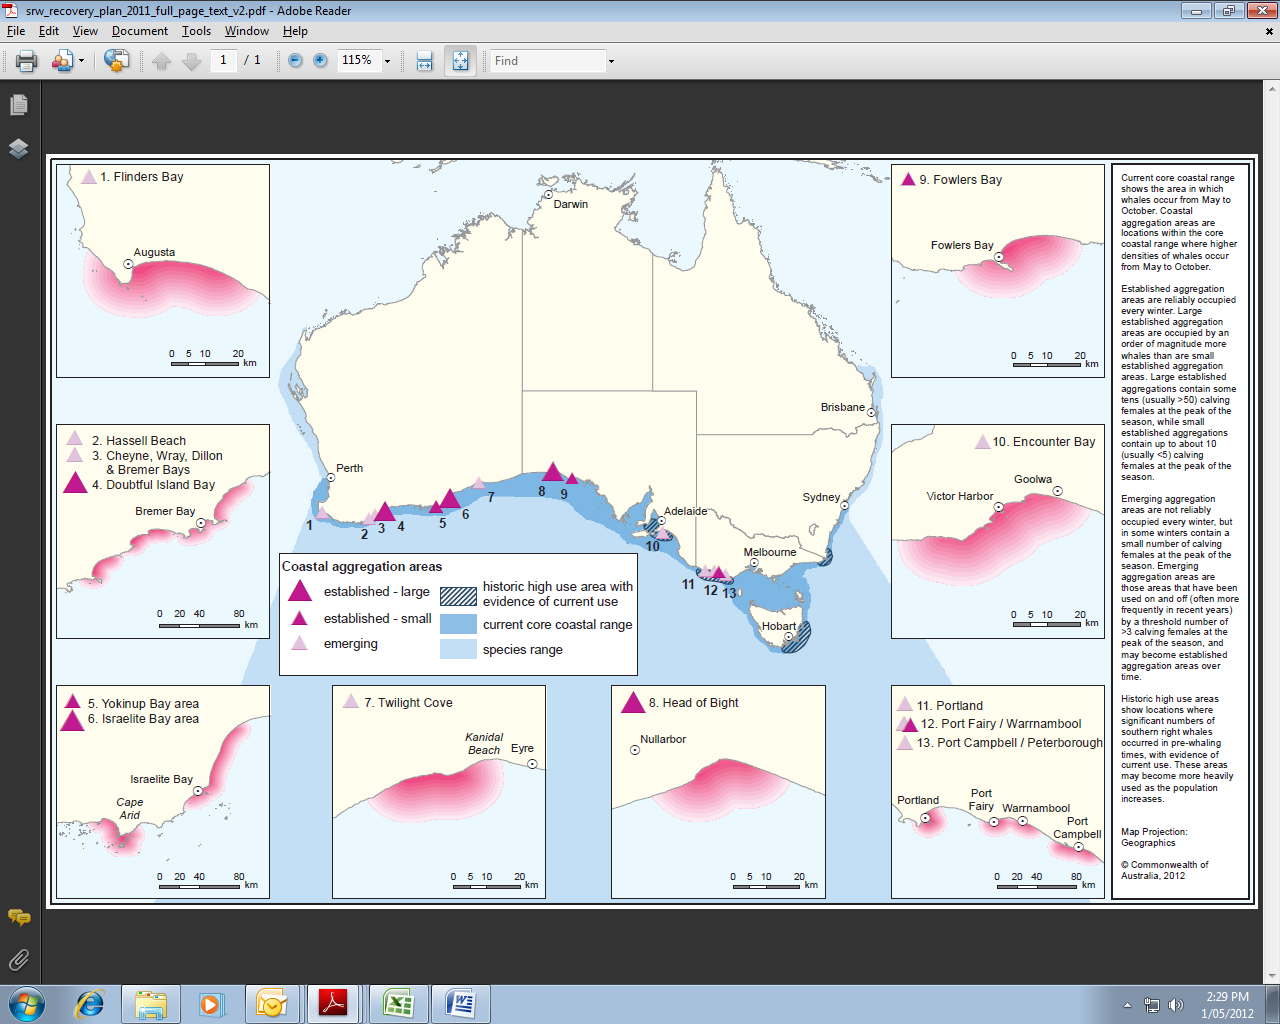 detailed map showing locations on australia\'s southern coastline where southern right whale occur - p.22 has geographic coordinates